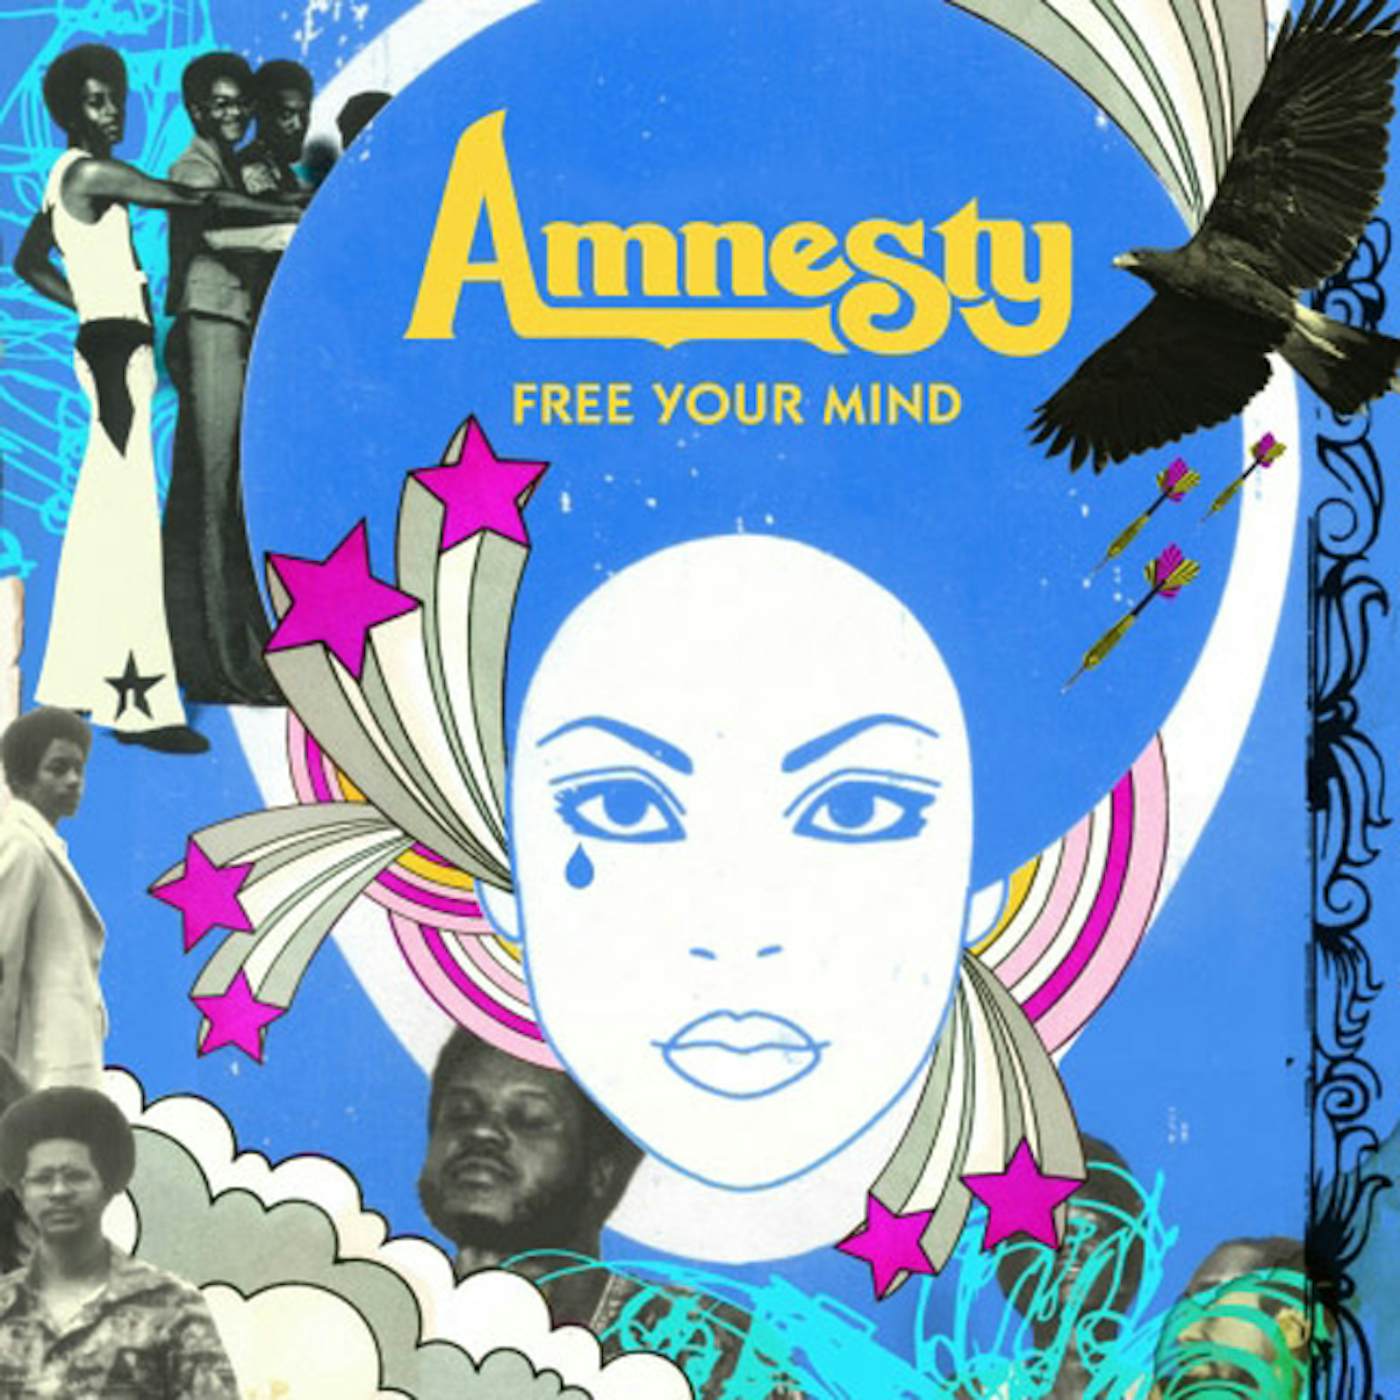 Amnesty Free Your Mind: The 700 West Sessions Vinyl Record